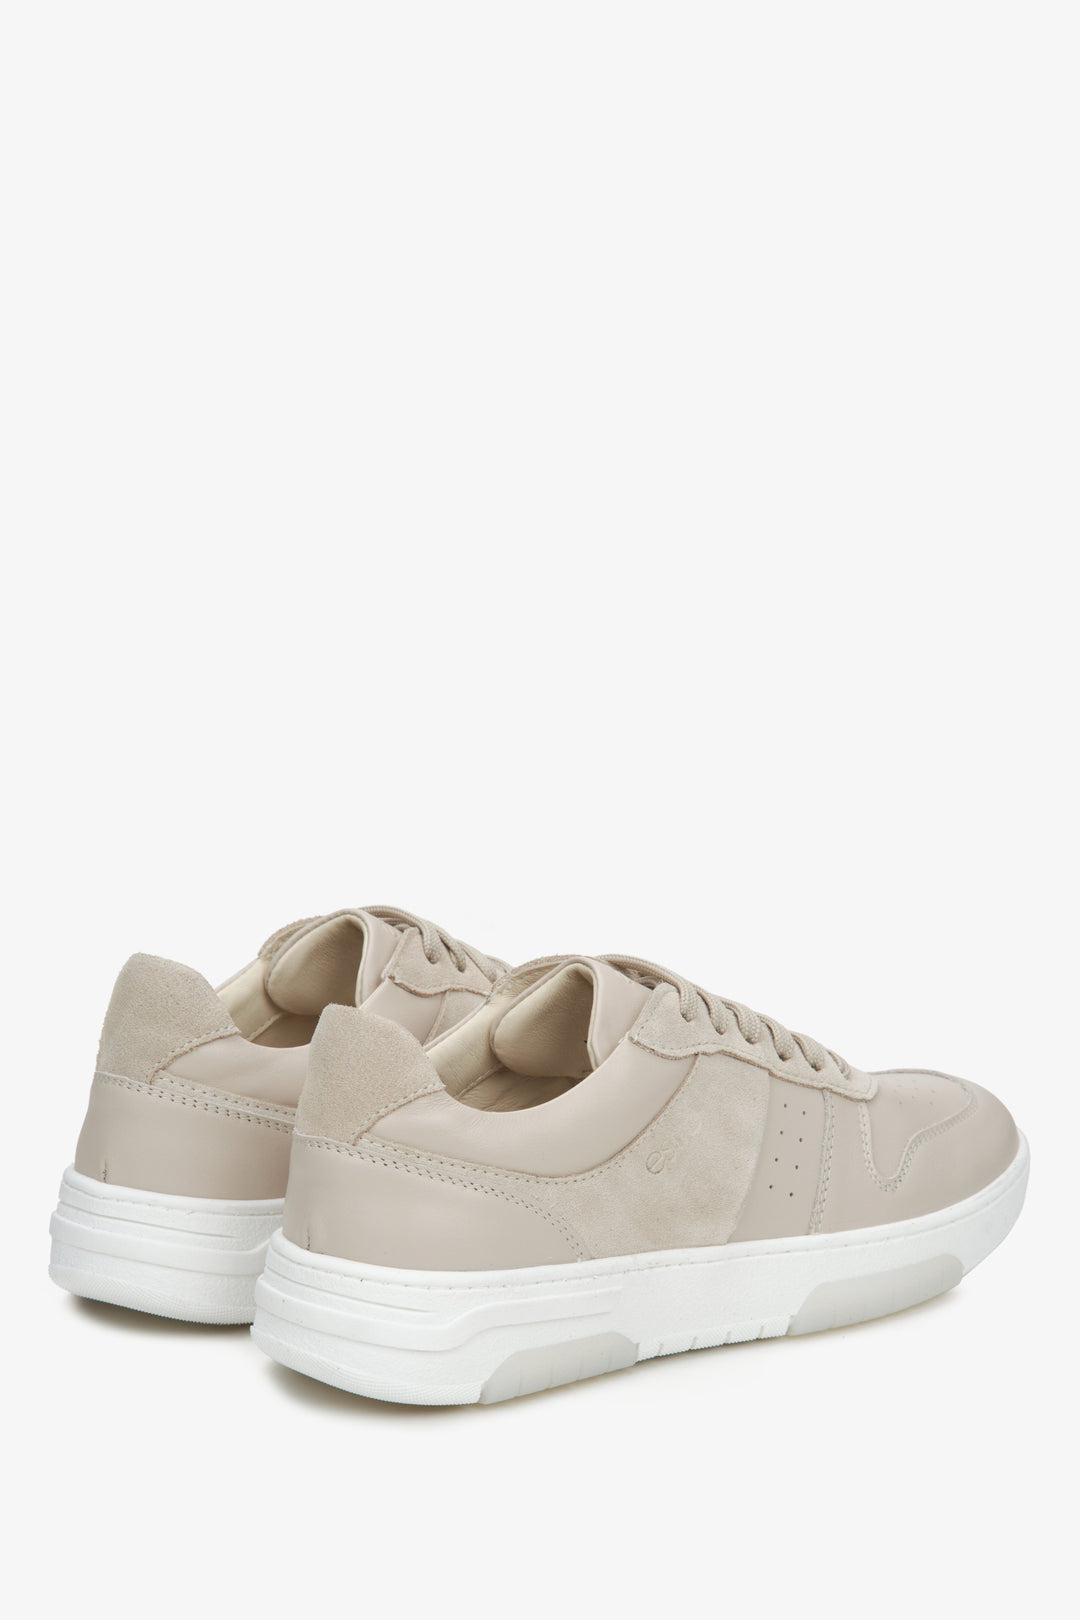 Estro beige women's sneakers - close-up on the heel counter and side profile of the shoe.